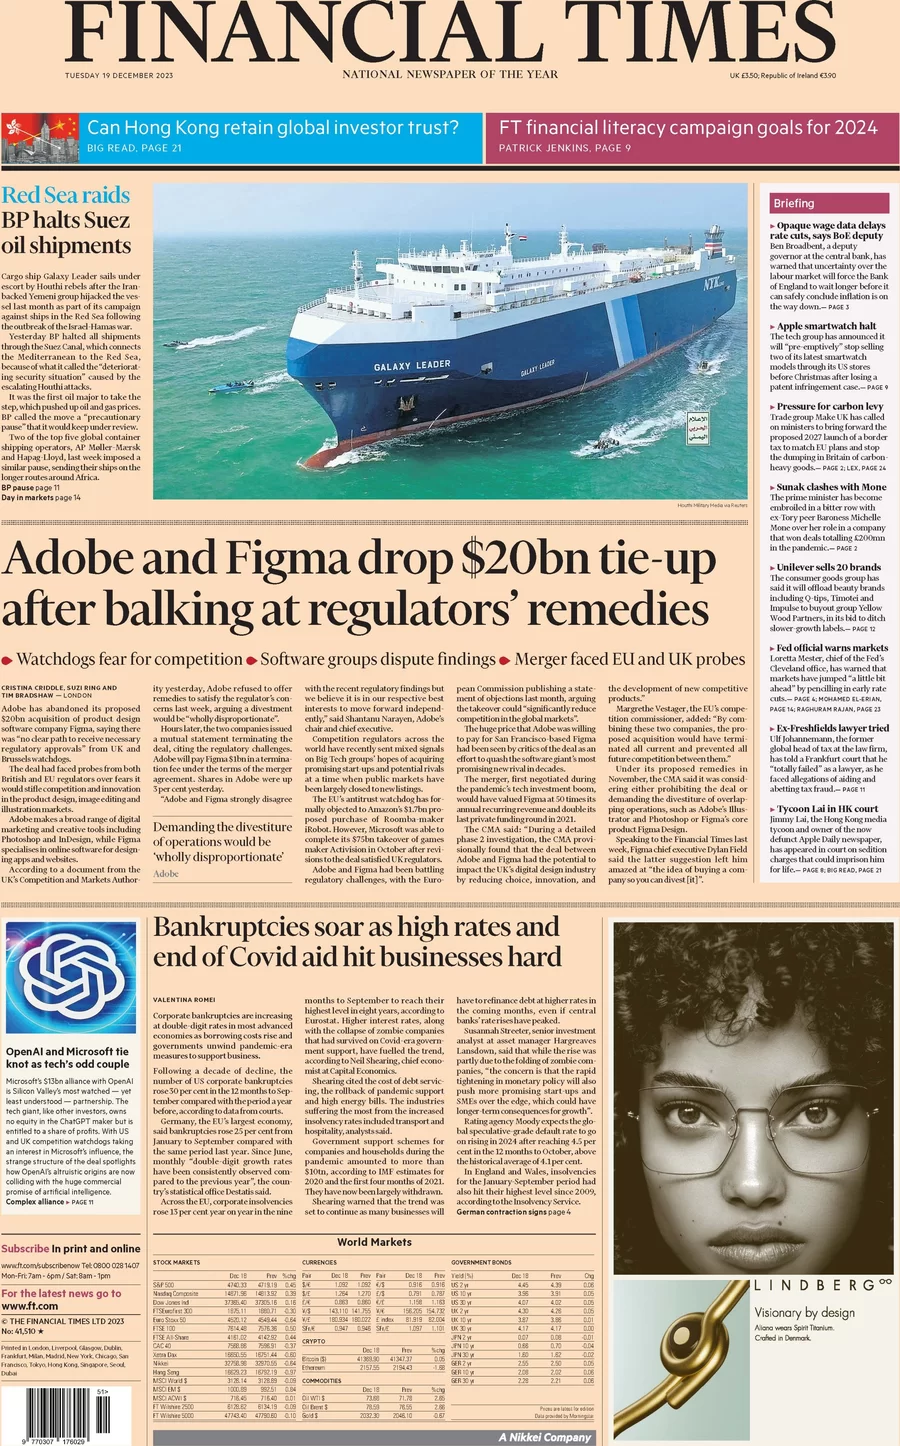 Financial Times - Adobe and Figma drop $20bn tie-up after baulking at regulators’ remedies 